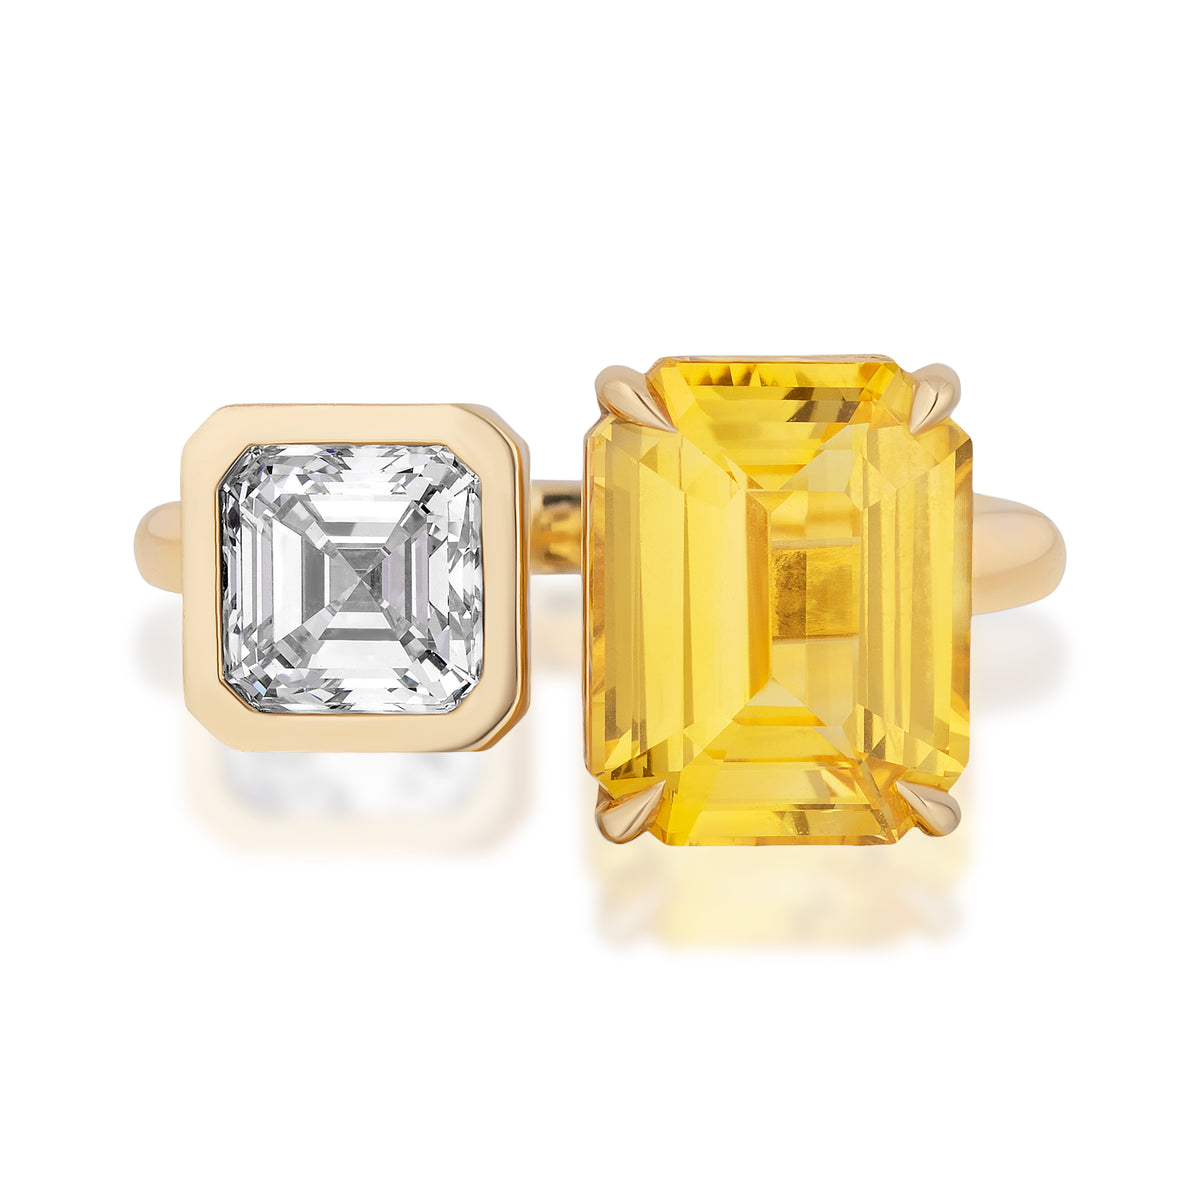 Toi Et Moi Ring in Yellow Gold with White Asscher Cut and Fancy Yellow Emerald Cut Diamonds